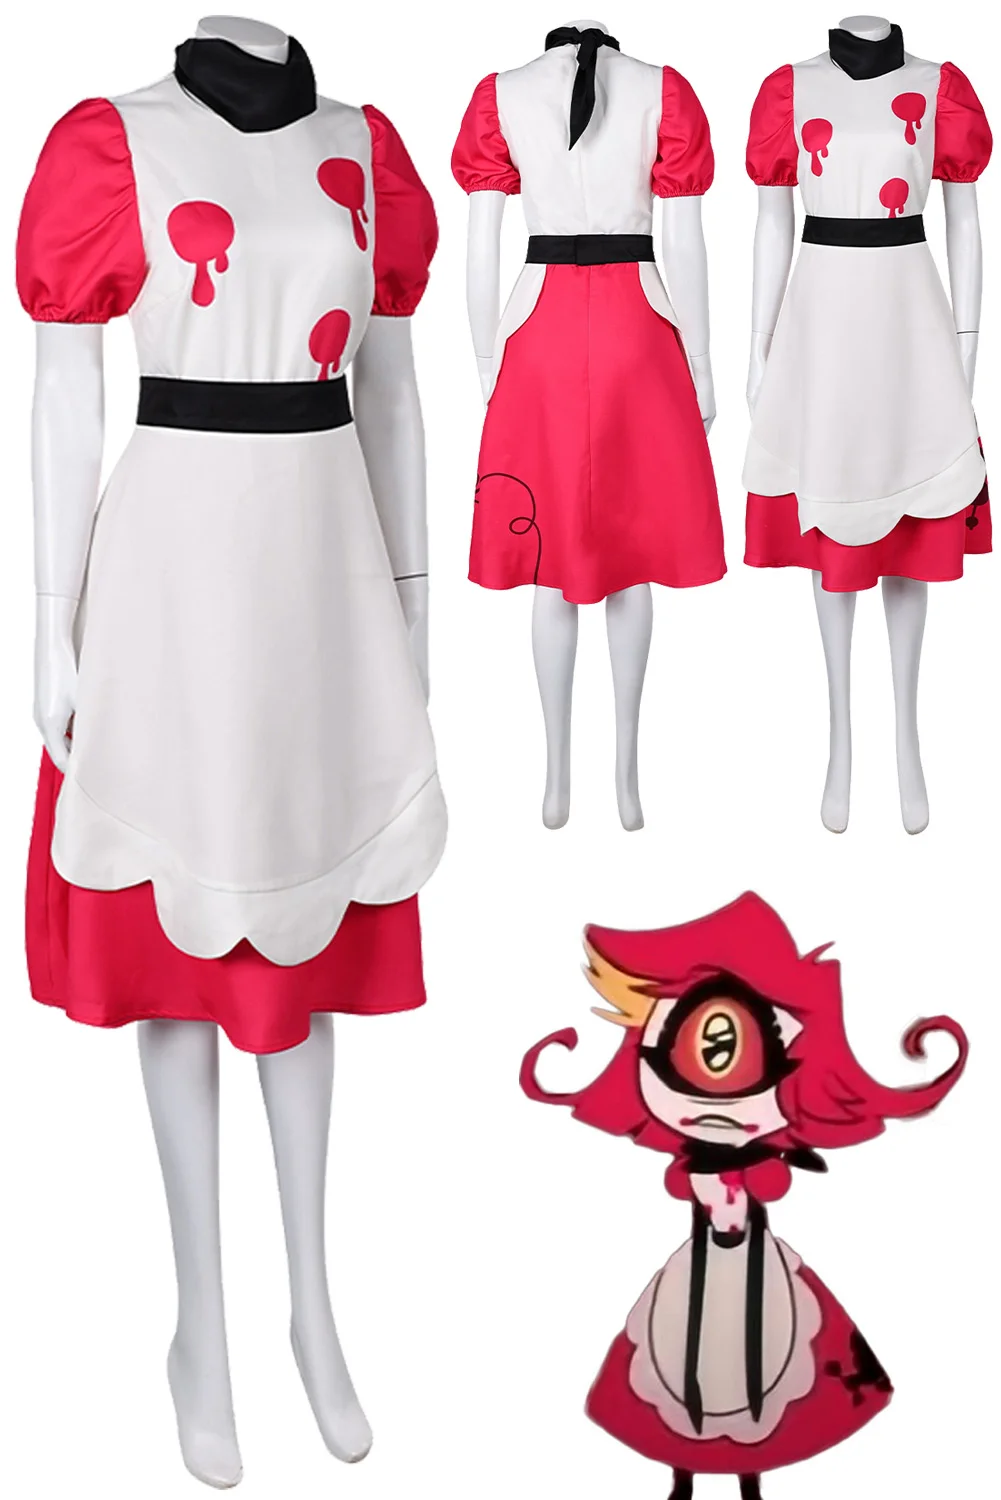 

Niffty Cosplay Anime Costume Hazzbin Cartoon Hotel Disguise Tie Dress Apron Suits Adult Women Halloween Roleplay Fantasia Outfit